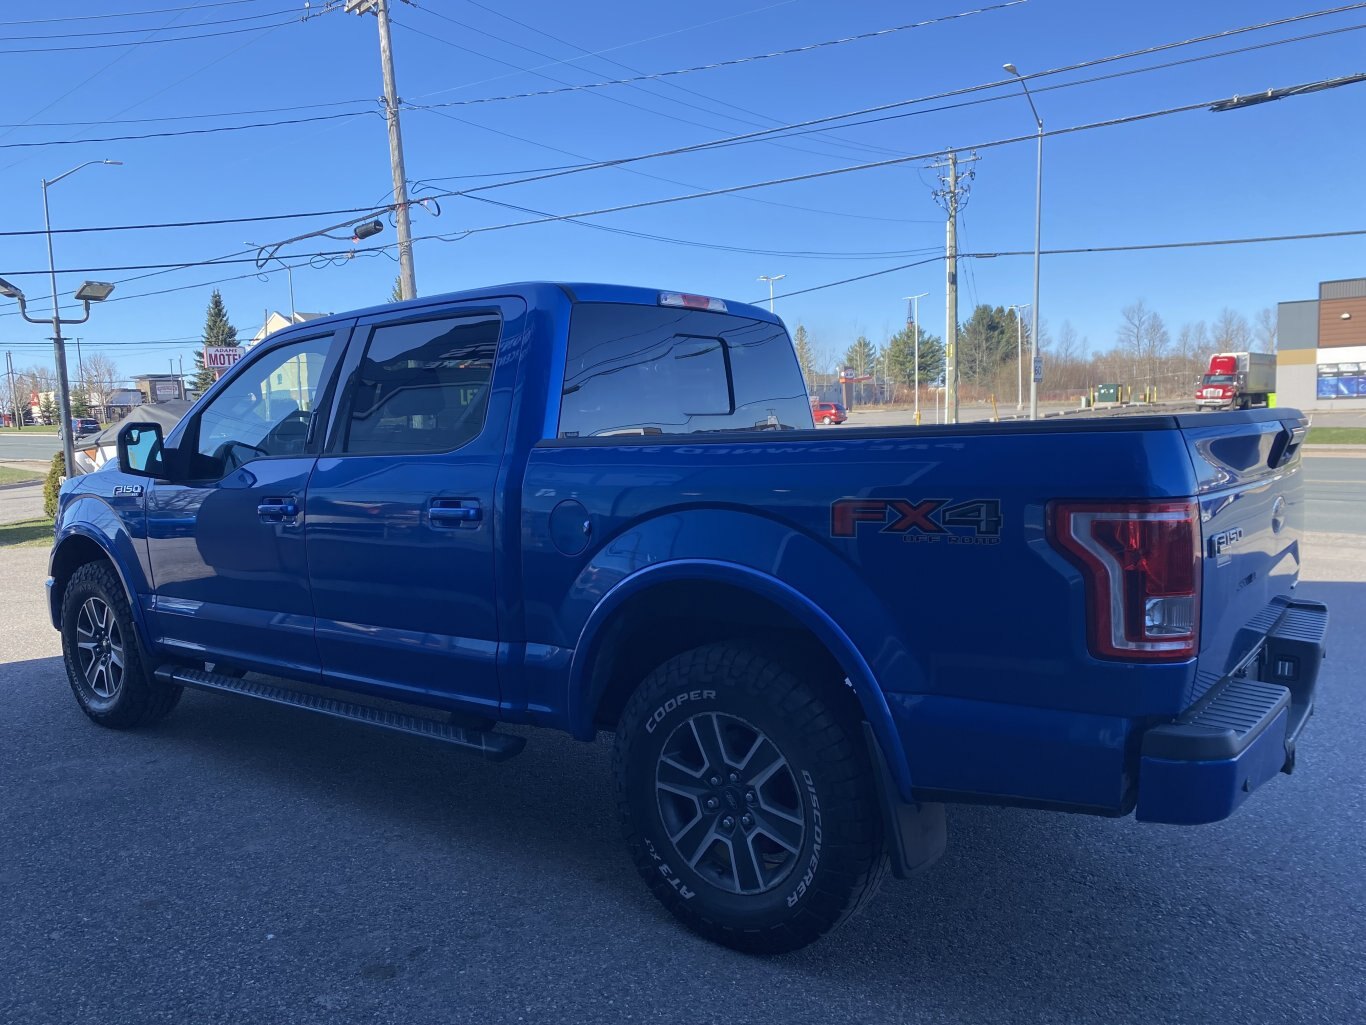 2015 FORD F 150 XLT/FX4 4X4 SUPER CREW WITH HEATED SEATS, REAR VIEW CAMERA AND NAVIGATION!!